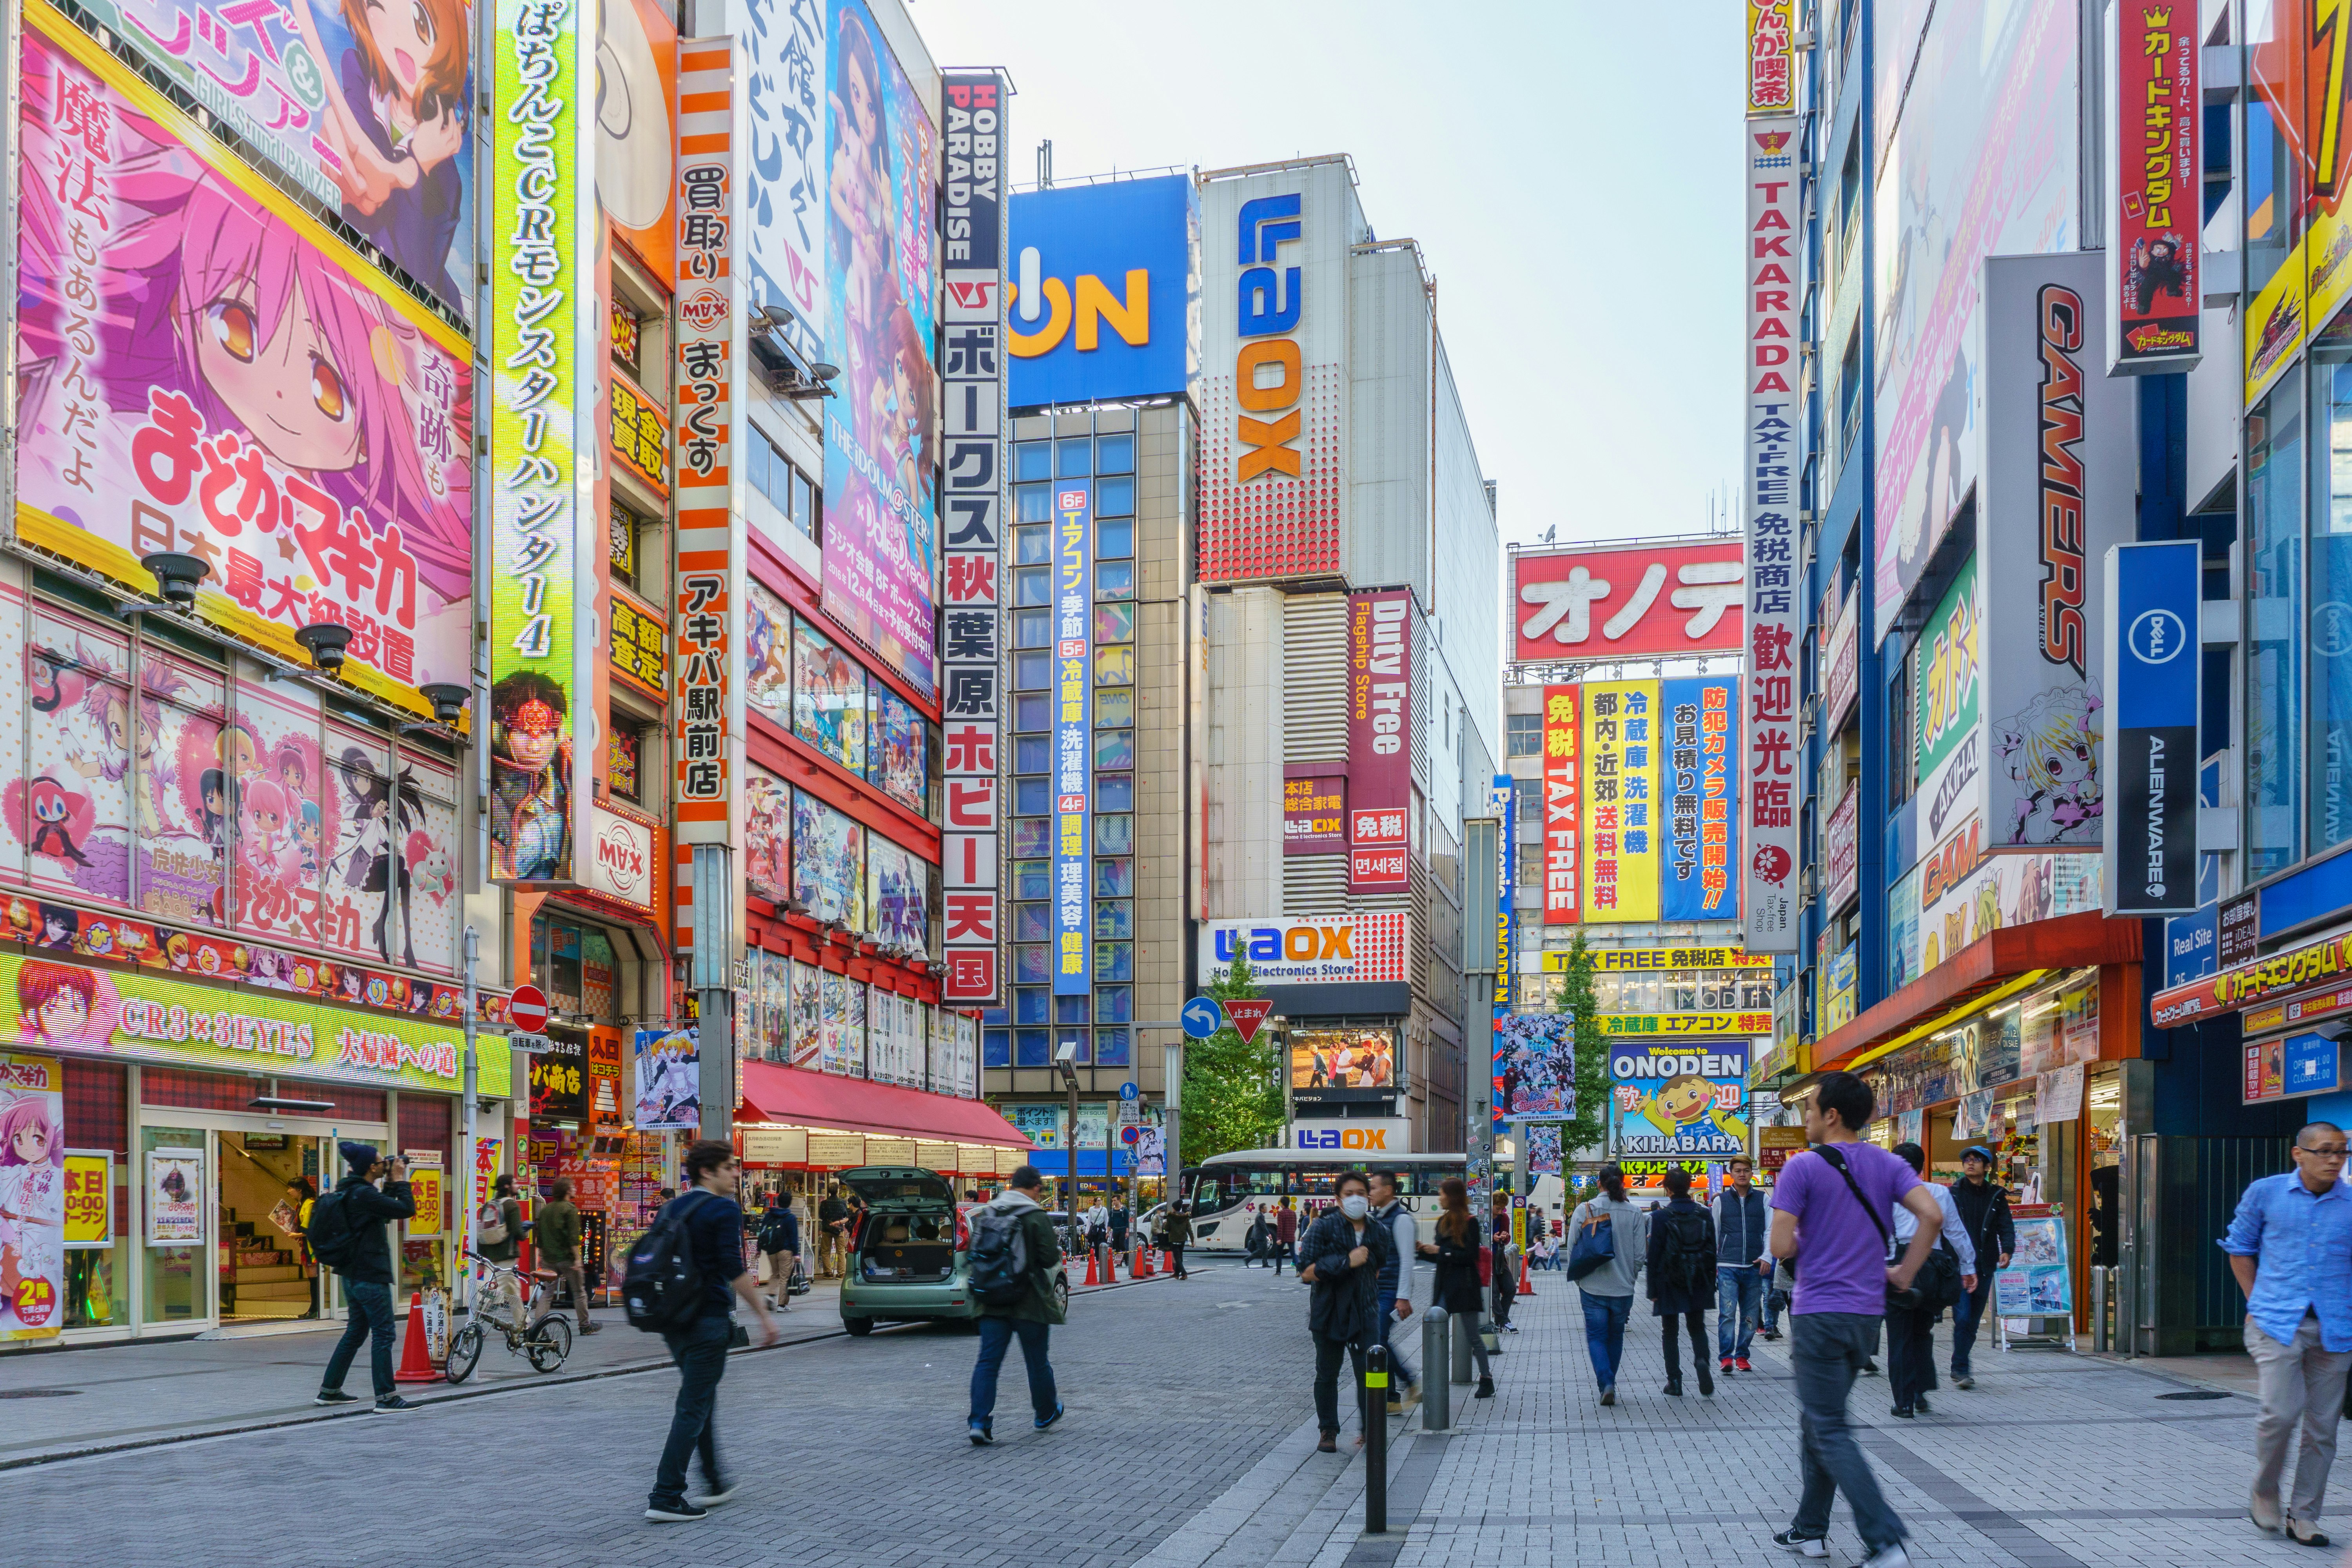 Bright neon signs and colourful billboard advertisements in Tokyo's Akihabara district